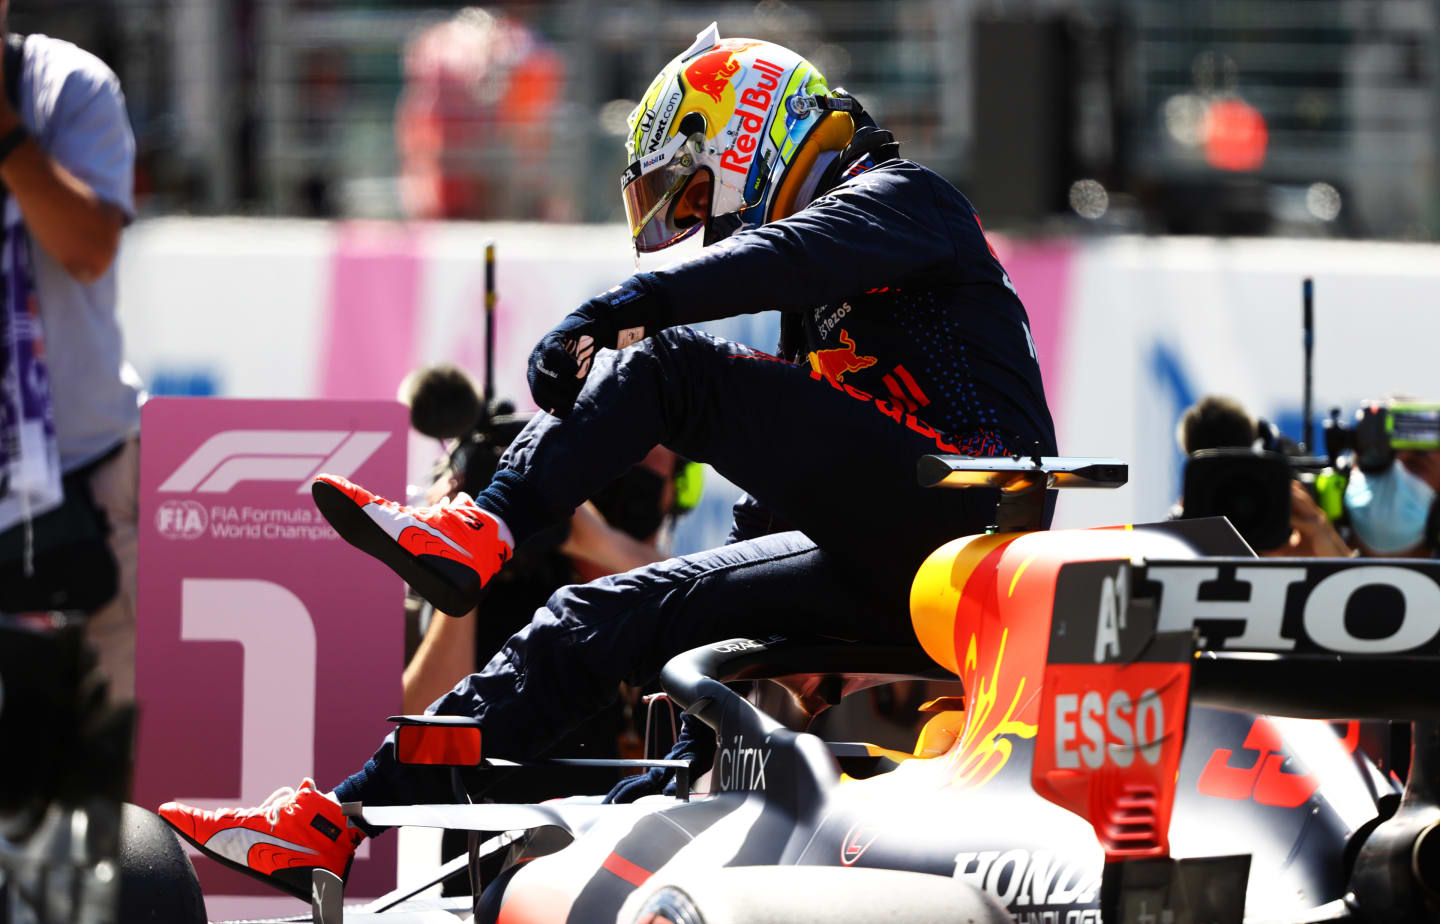 SPIELBERG, AUSTRIA - JUNE 26: Pole position qualifier Max Verstappen of Netherlands and Red Bull Racing celebrates in parc ferme during qualifying ahead of the F1 Grand Prix of Styria at Red Bull Ring on June 26, 2021 in Spielberg, Austria. (Photo by Bryn Lennon/Getty Images)